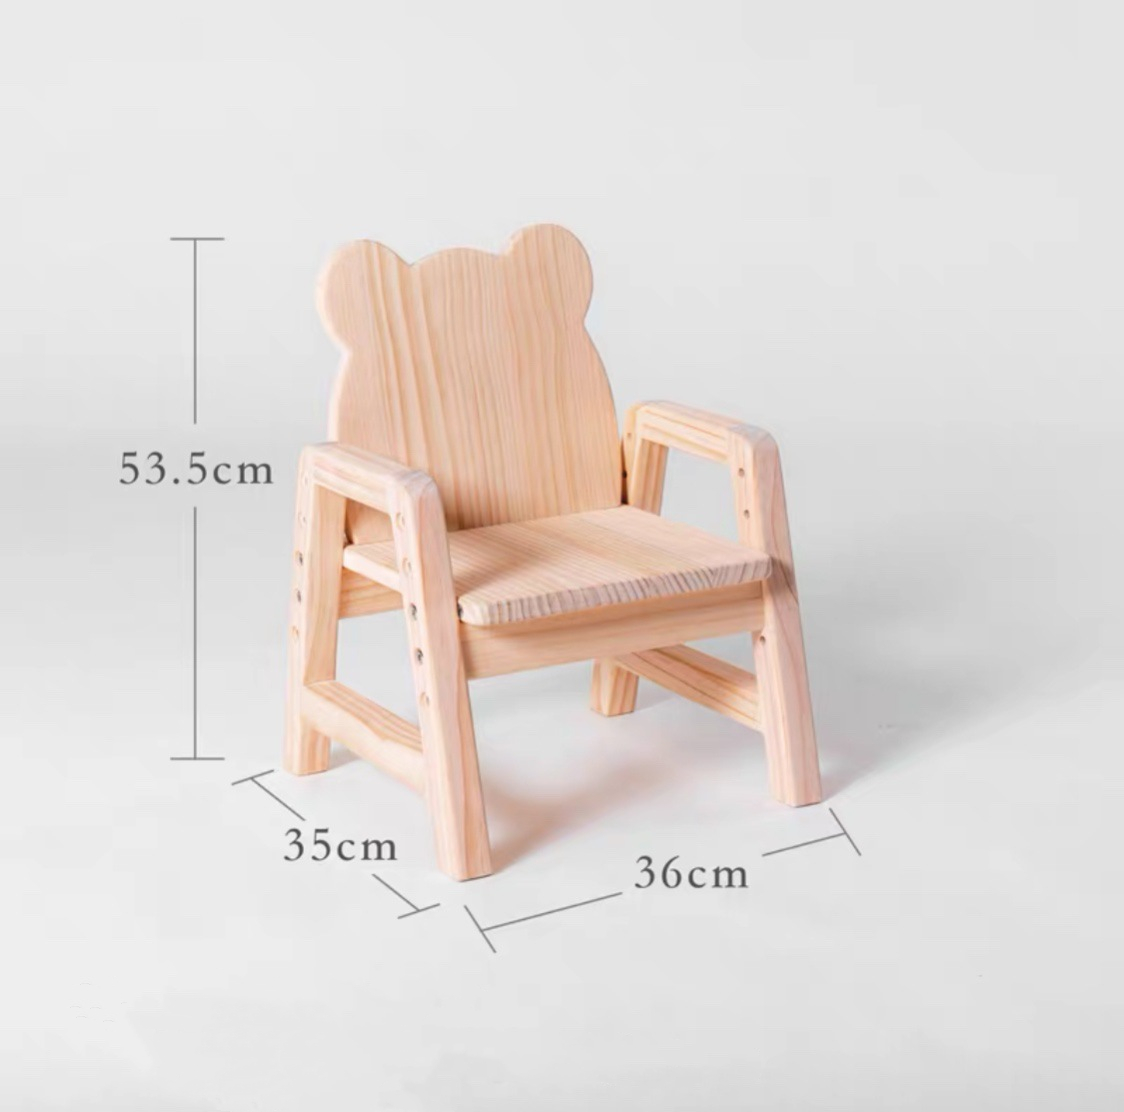 Kindergarten Furniture Set Little Baby wood Study Kids Party Table and Chairs Set  (7).jpg